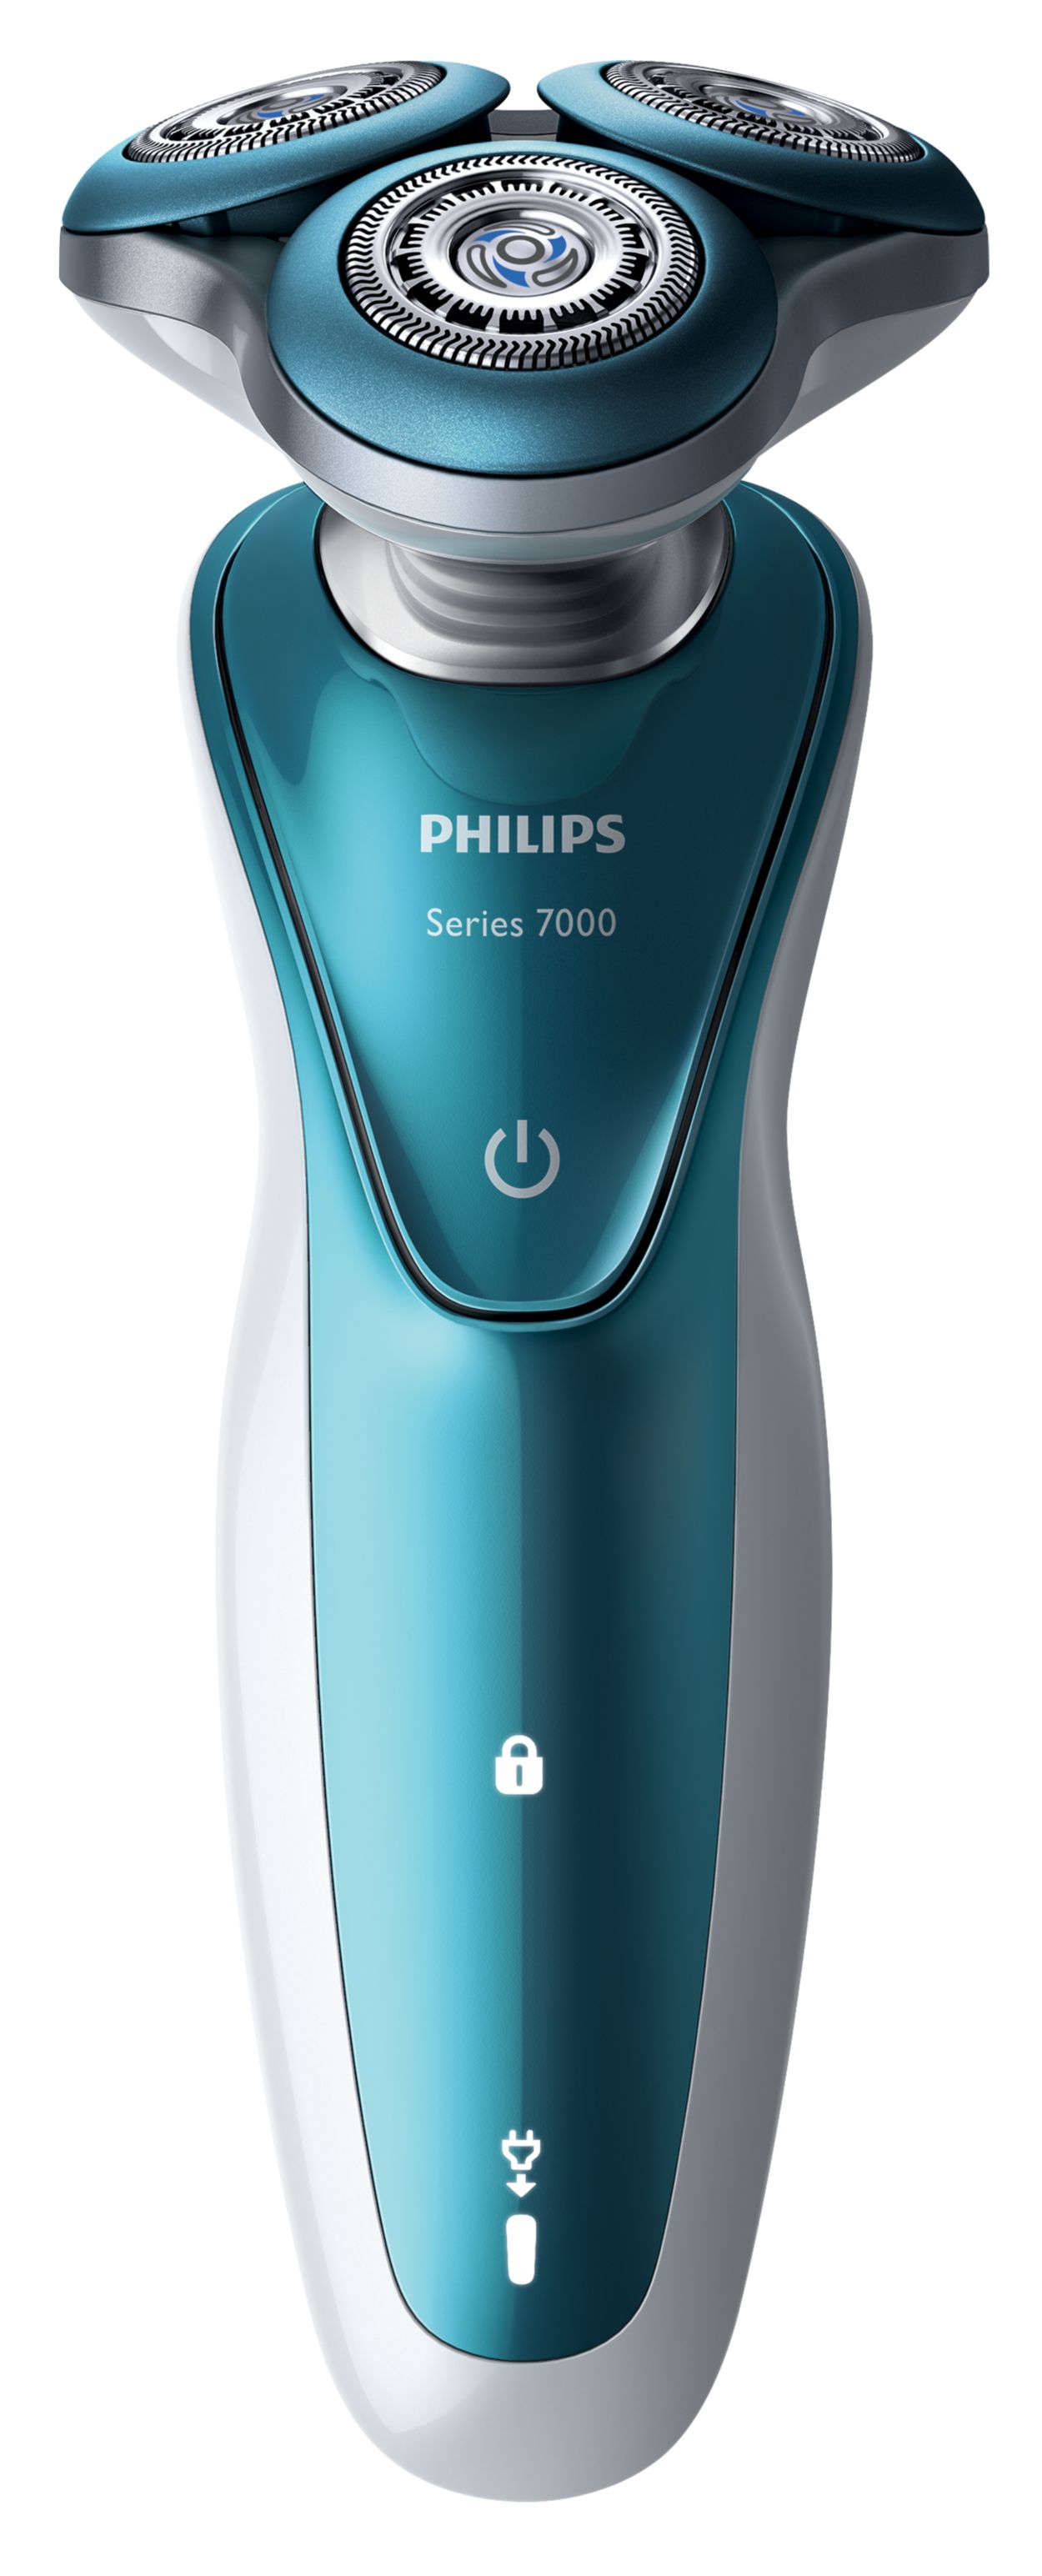 Fragroom Product Review: Philips Series 7000 Wet & Dry Electric Shaver